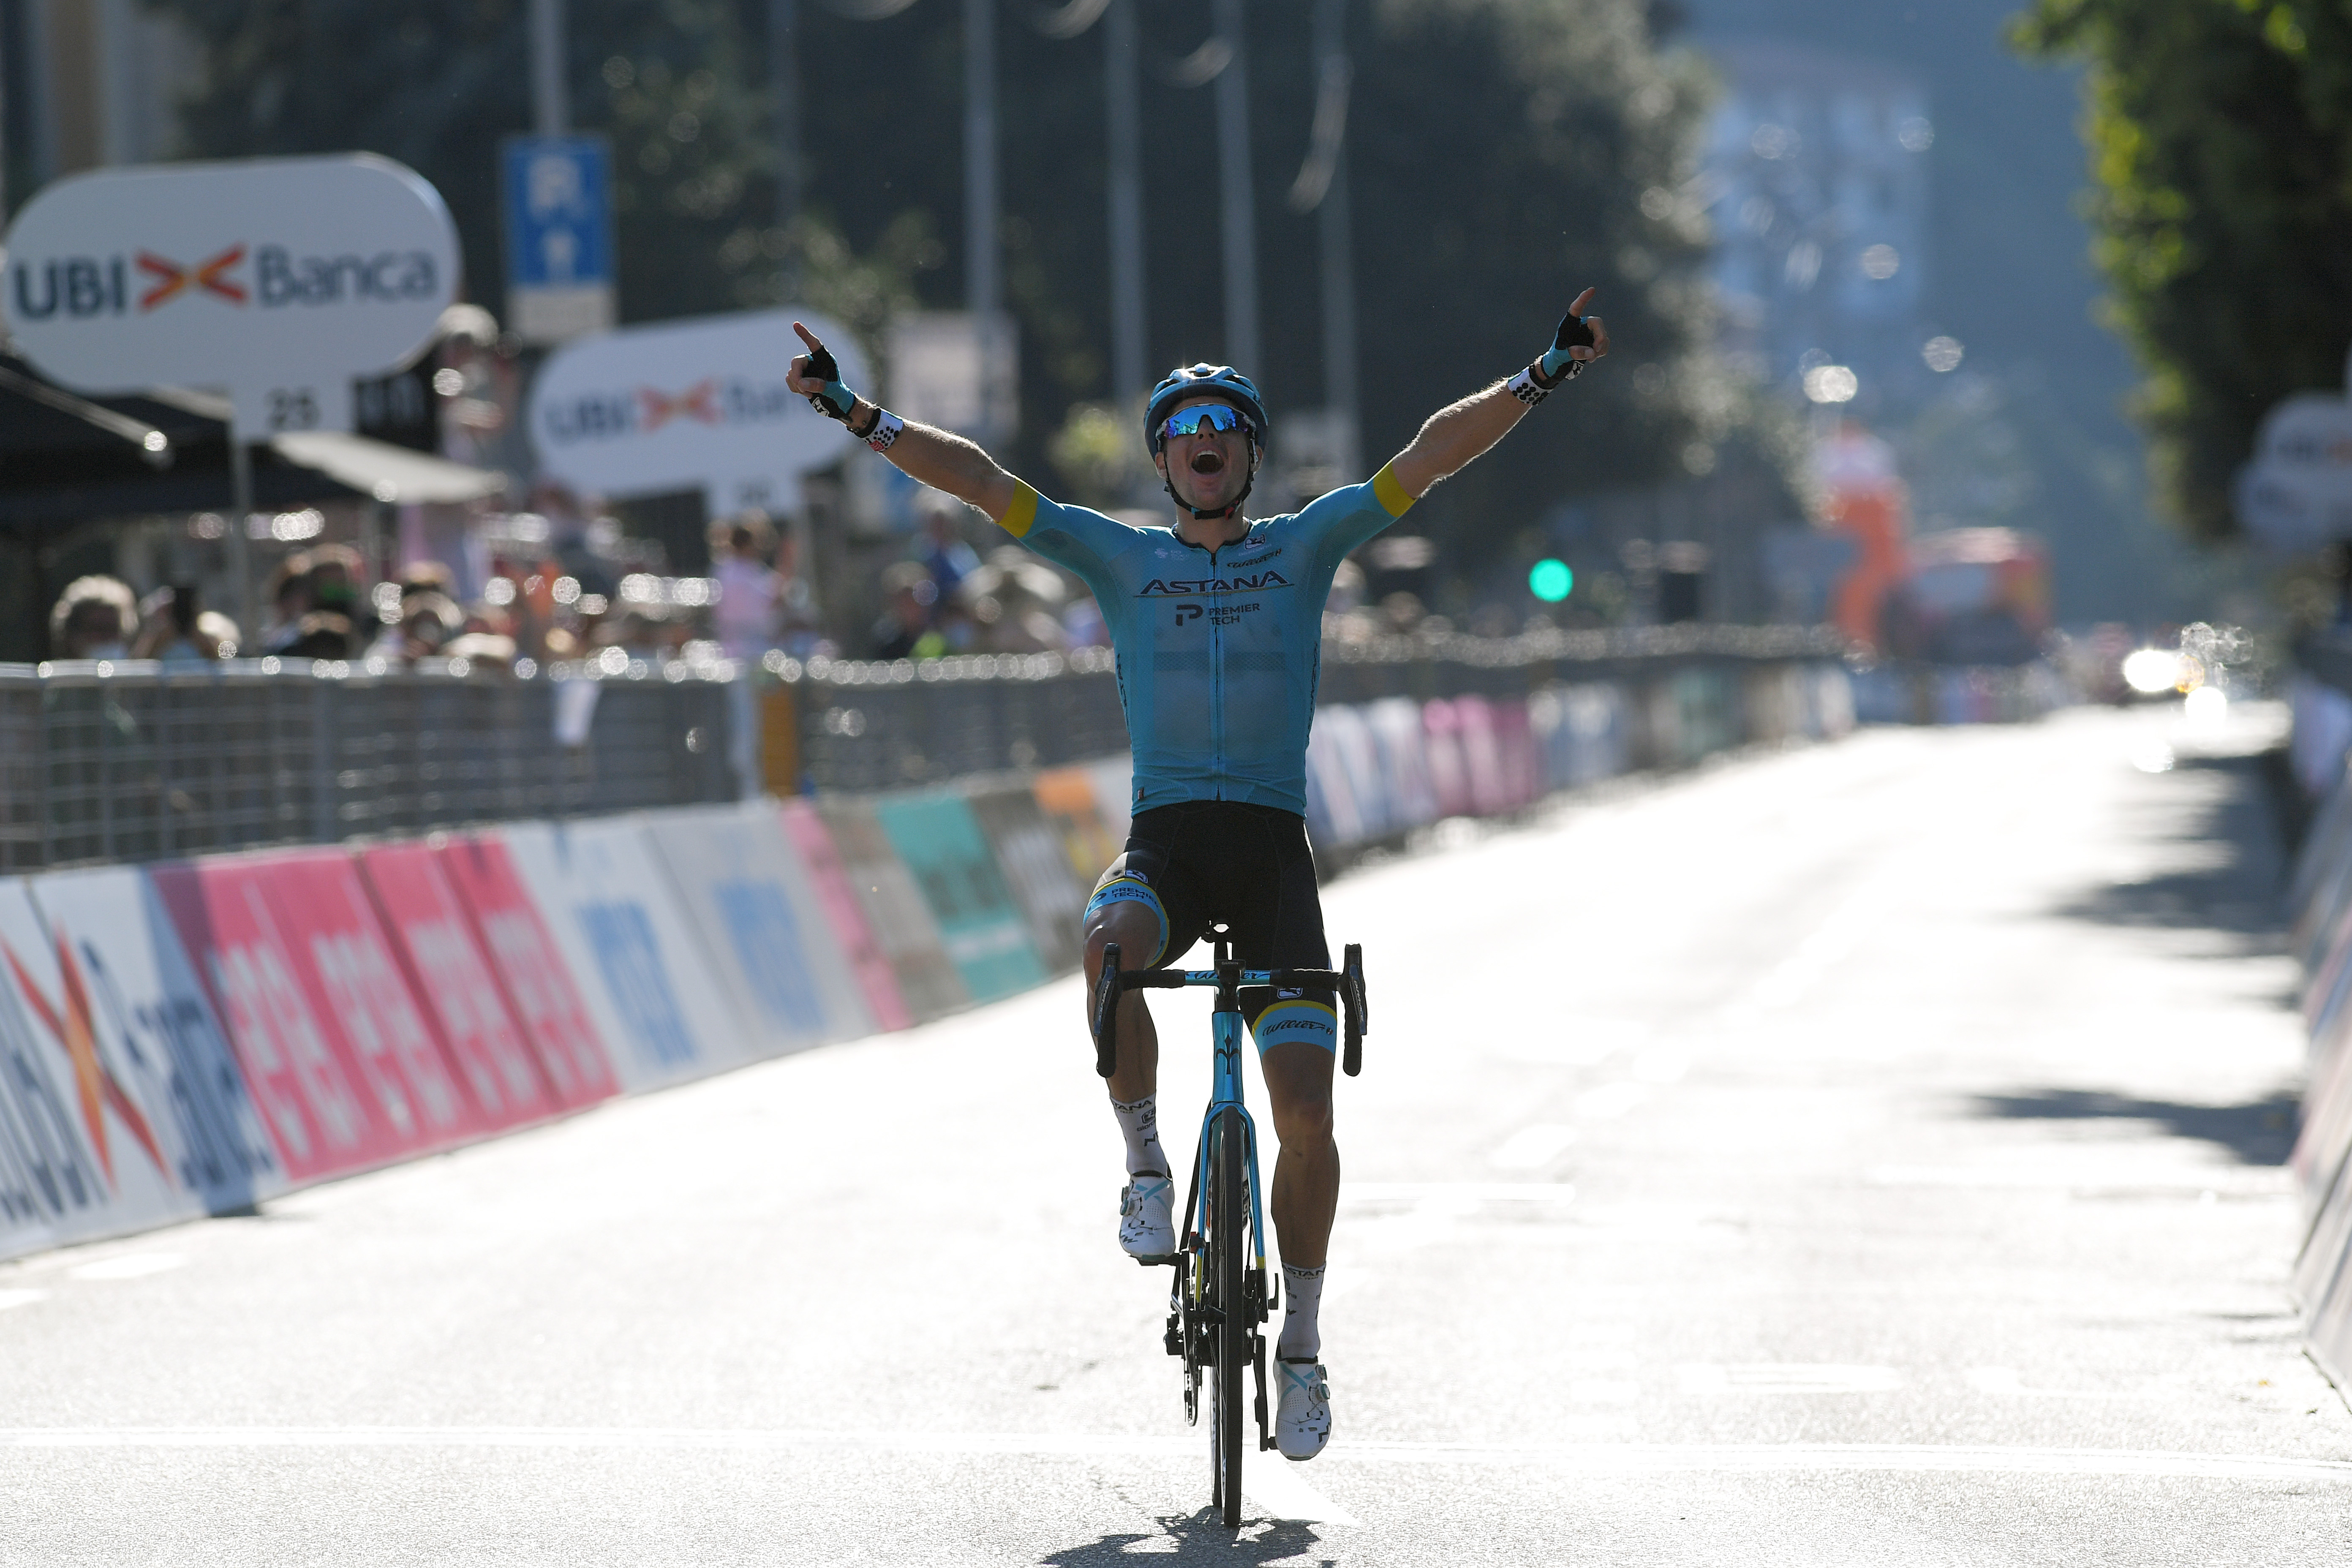 COMO ITALY AUGUST 15 Arrival Jakob Fuglsang of Denmark and Astana Pro Team Celebration during the 114th Il Lombardia 2020 a 231km race from Bergamo to Como ilombardia IlLombardia on August 15 2020 in Como Italy Photo by Tim de WaeleGetty Images